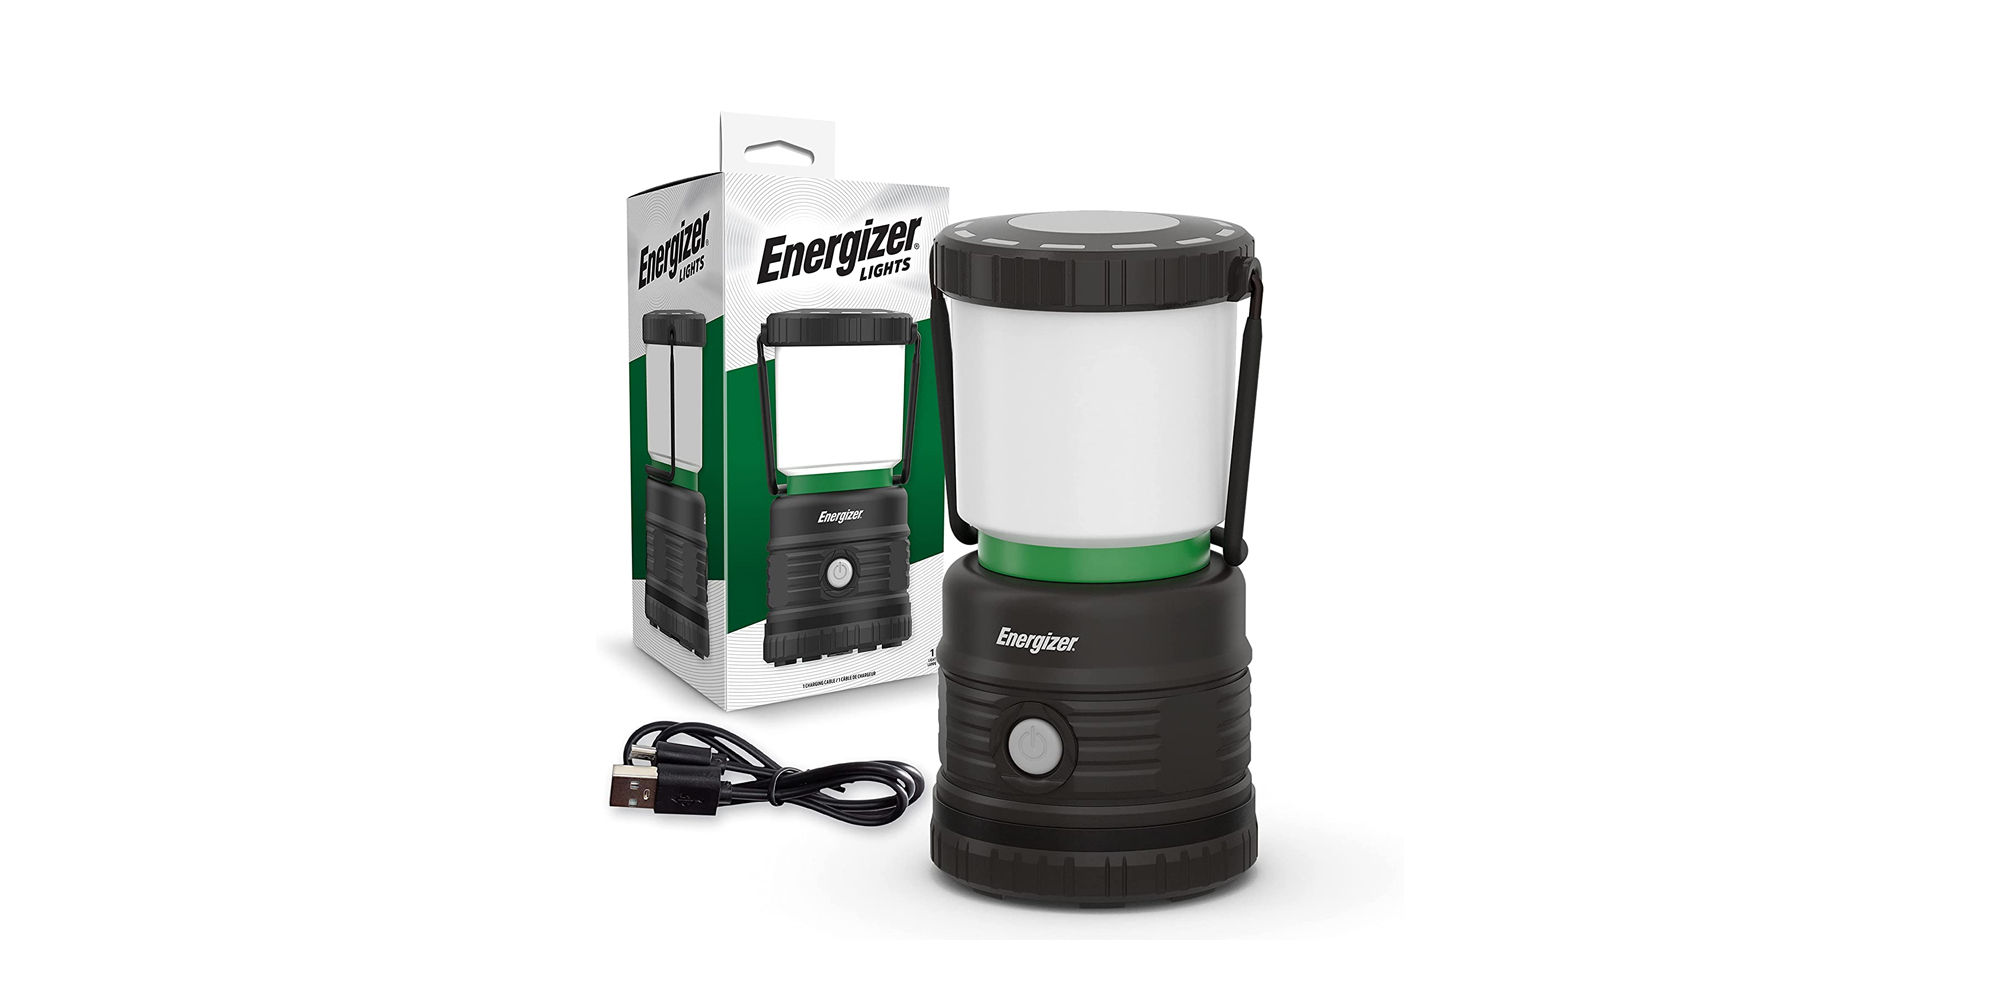 2023 Upadte Solar Lantern Flashlights Charging for Phone, USB Rechargeable  Led Camping Lantern, Collapsible & Portable for Emergency, Hurricanes